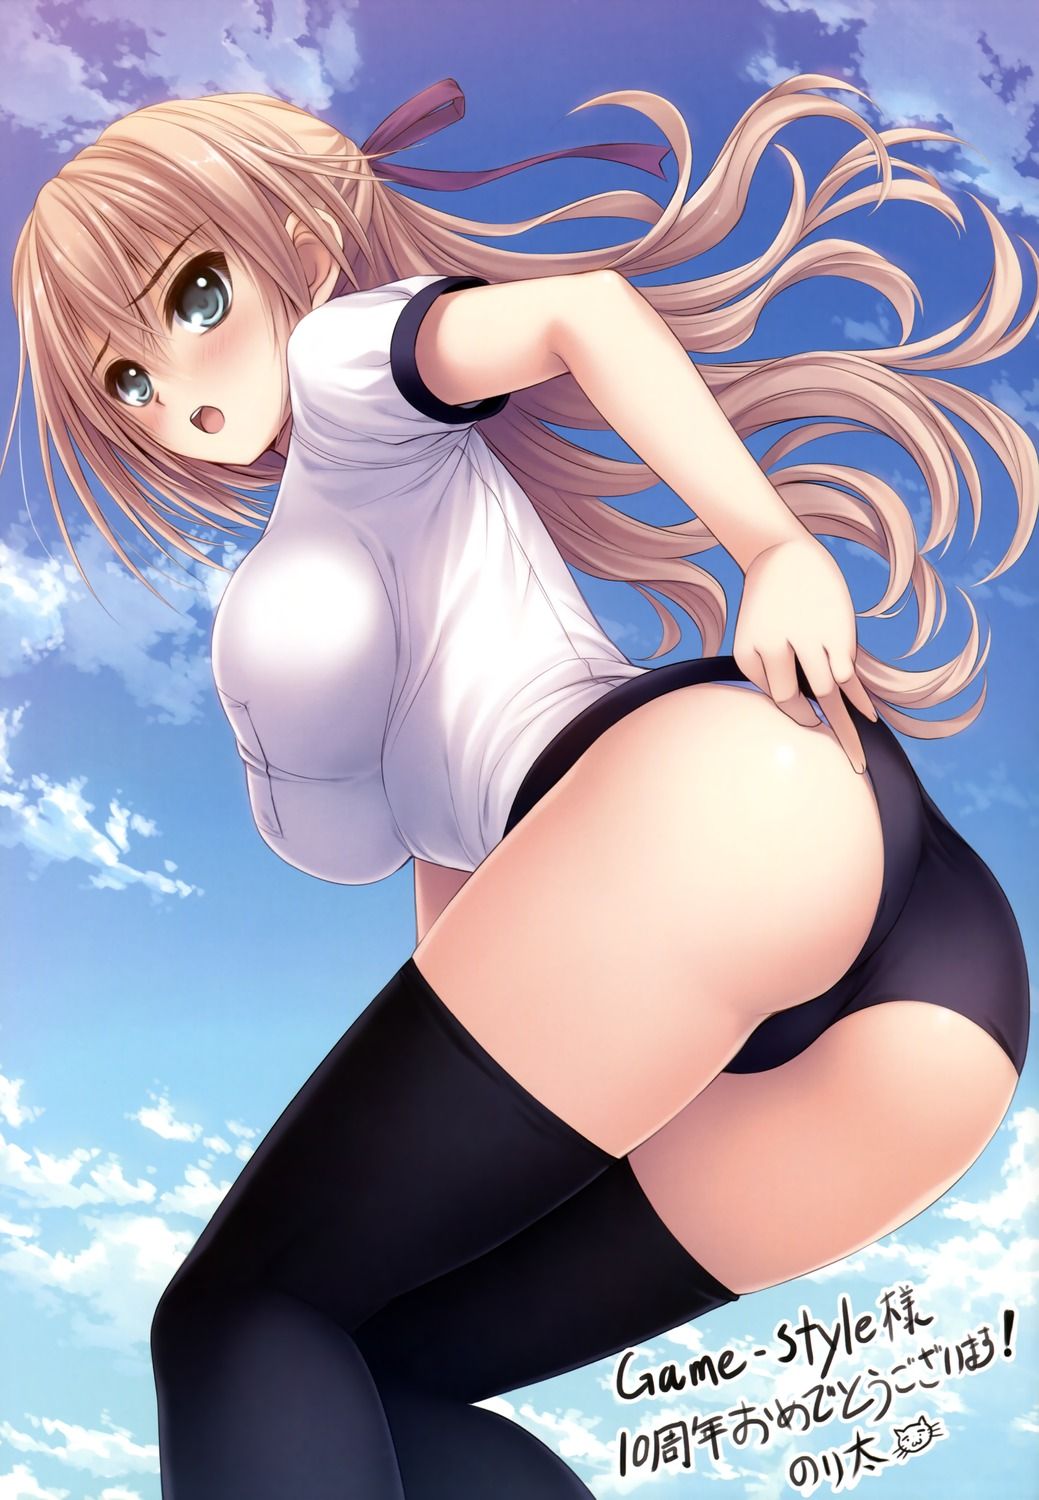 Cane want thighs! The second erotic picture of the girl wearing bloomers and gymnastics wwww part4 1